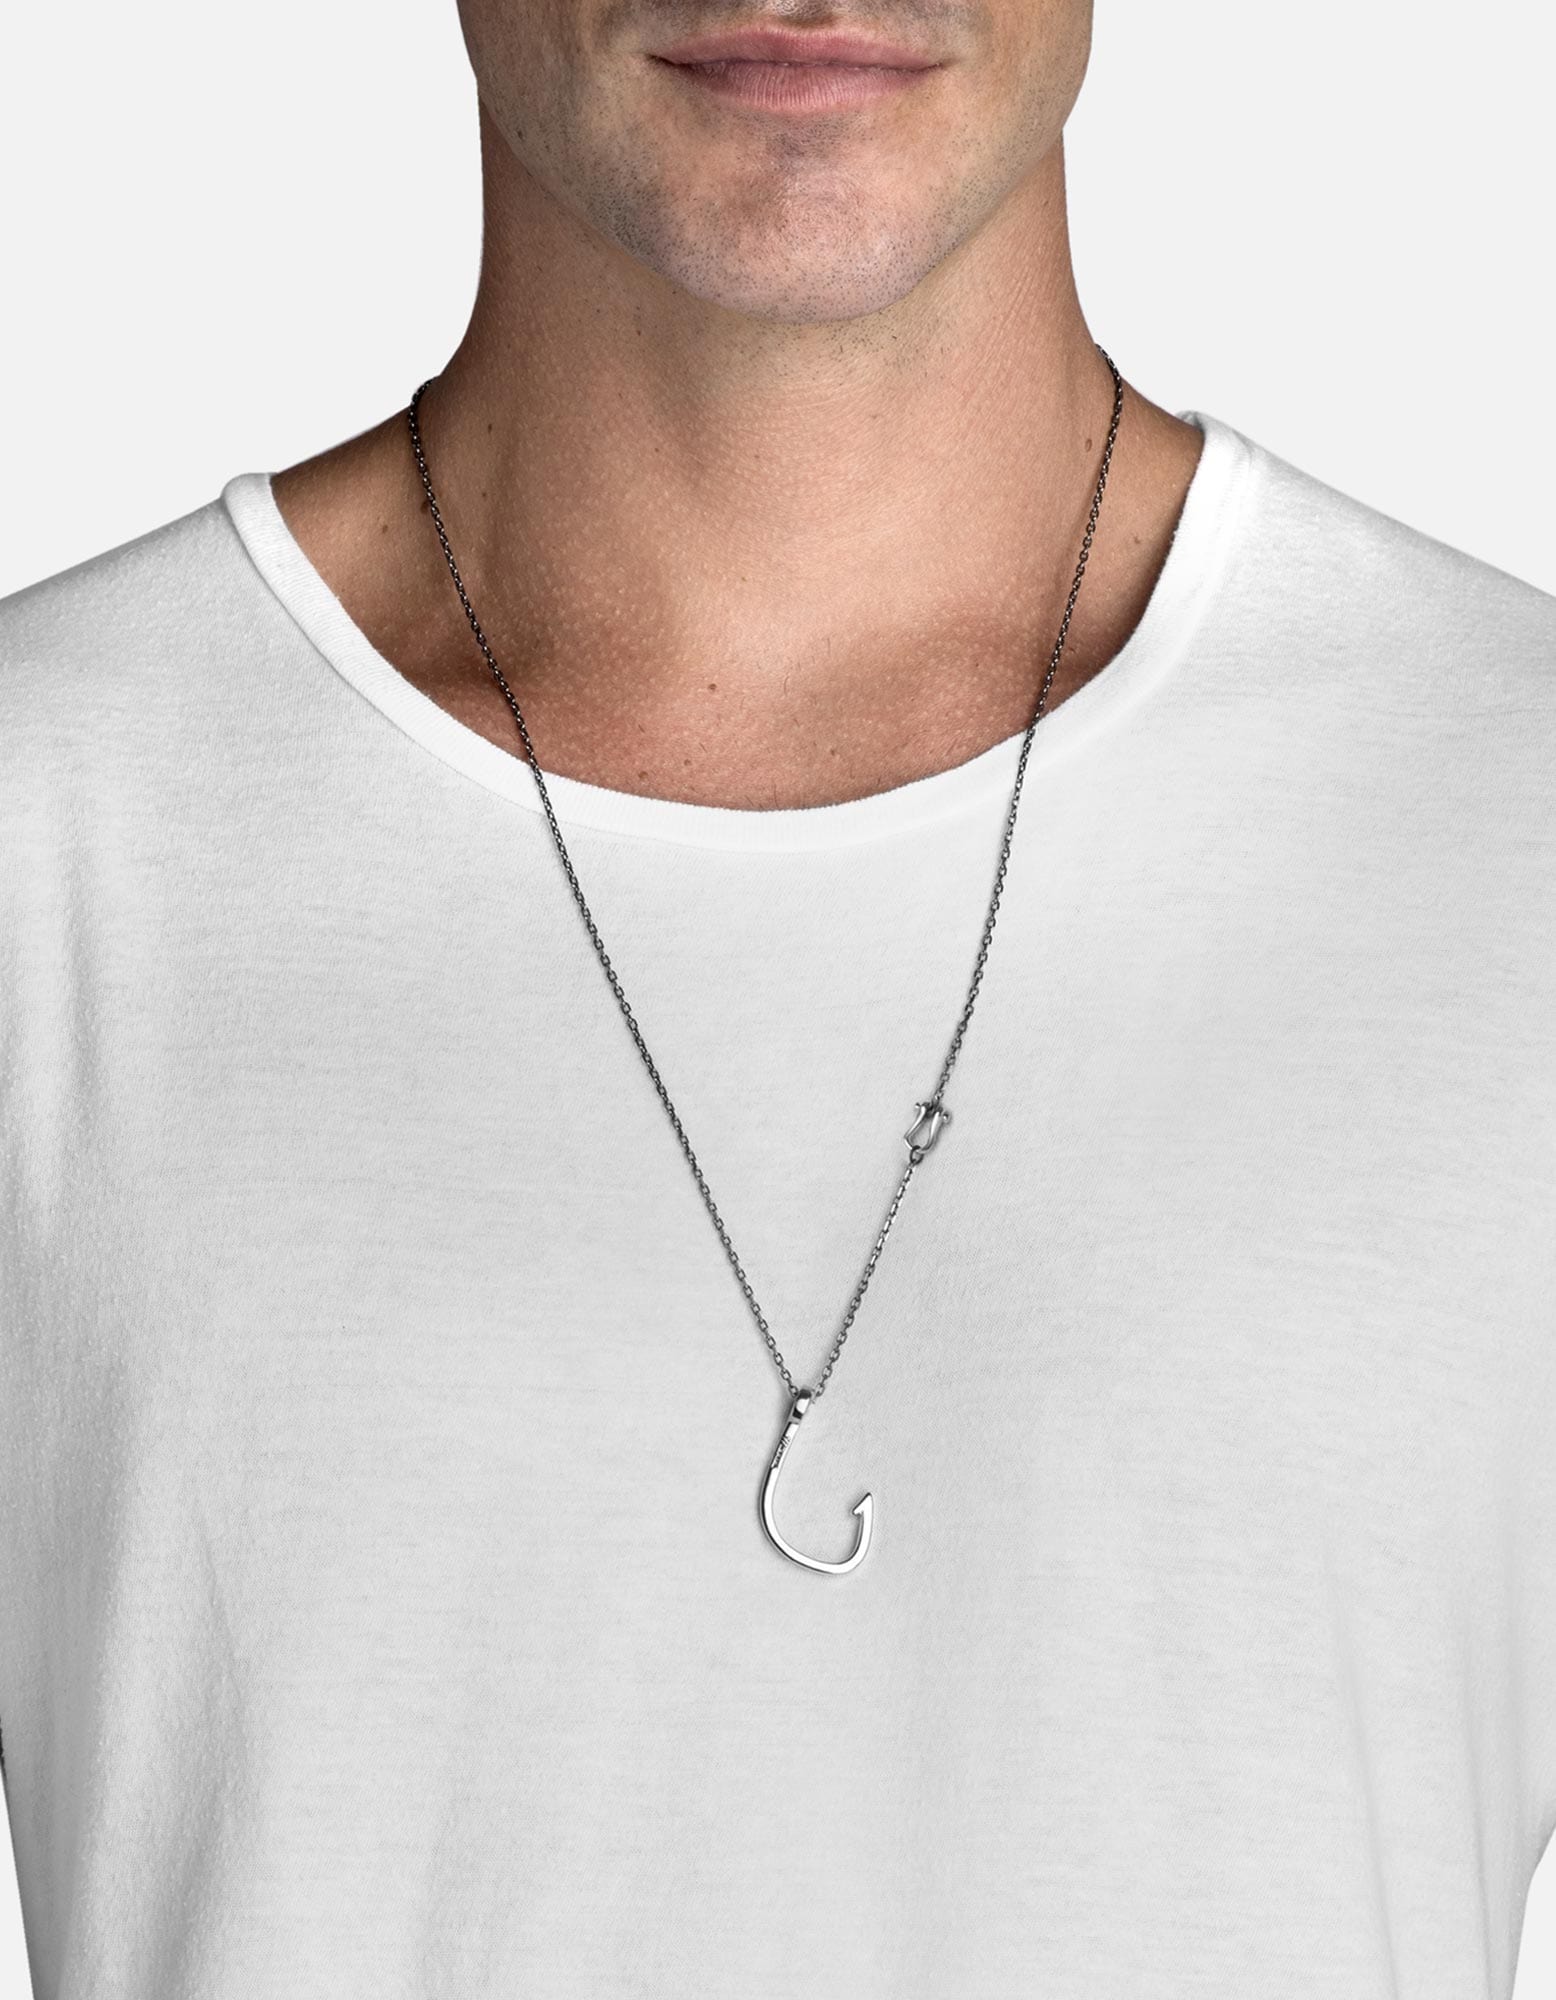 Hooked Necklace, Silver, Men's Necklaces